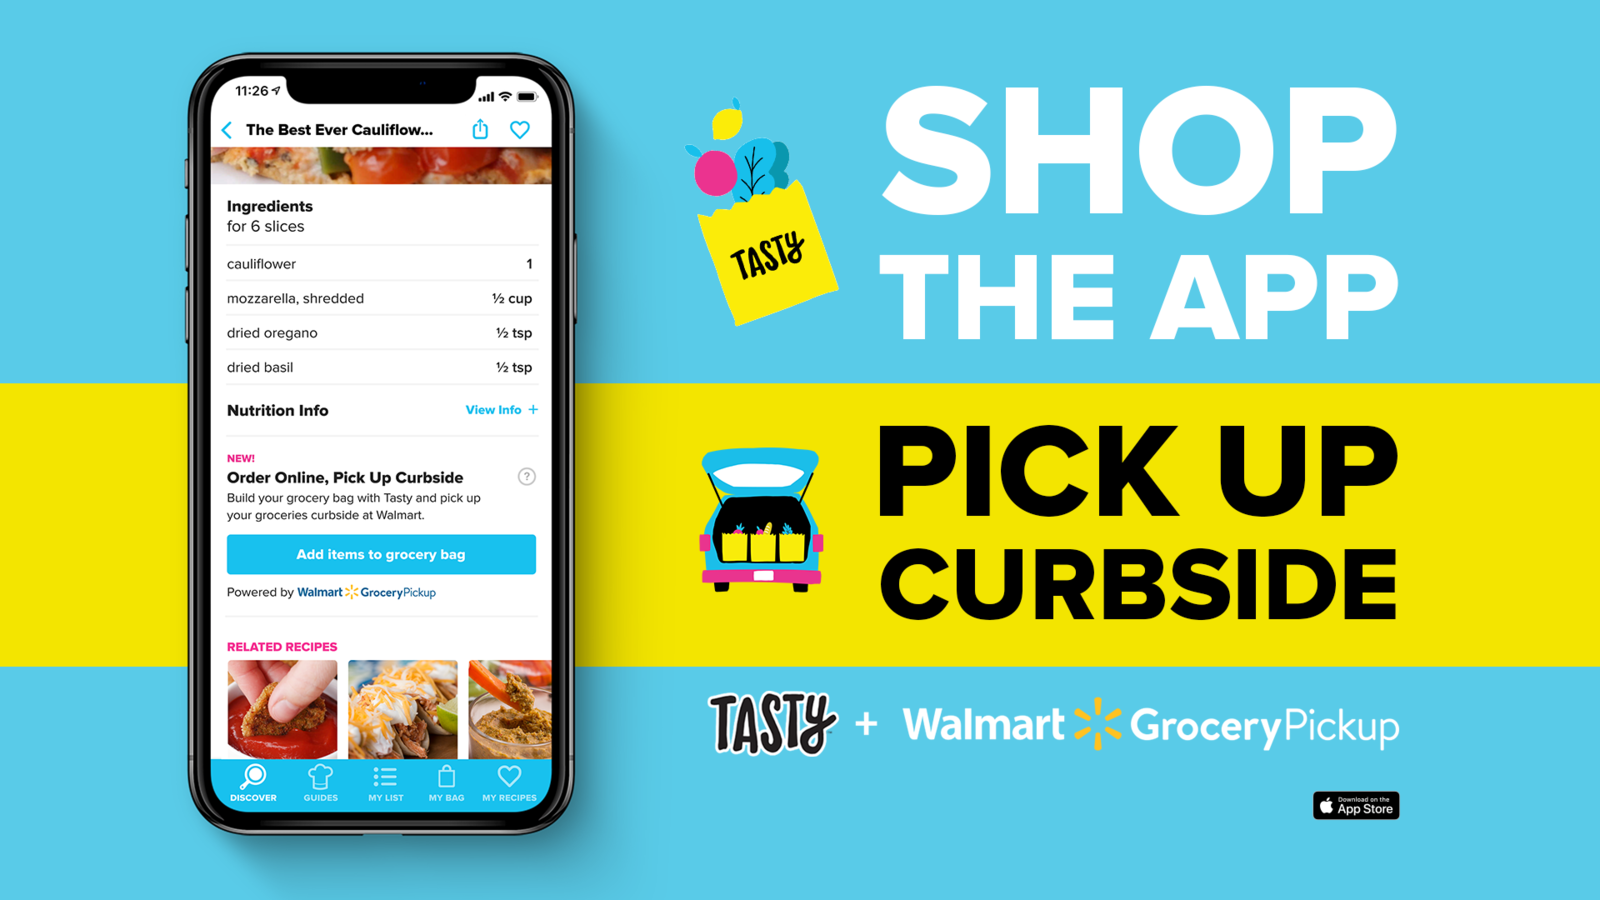 Walmart&#x27;s grocery pickup ad with Tasty app on phone screen, promoting curbside service